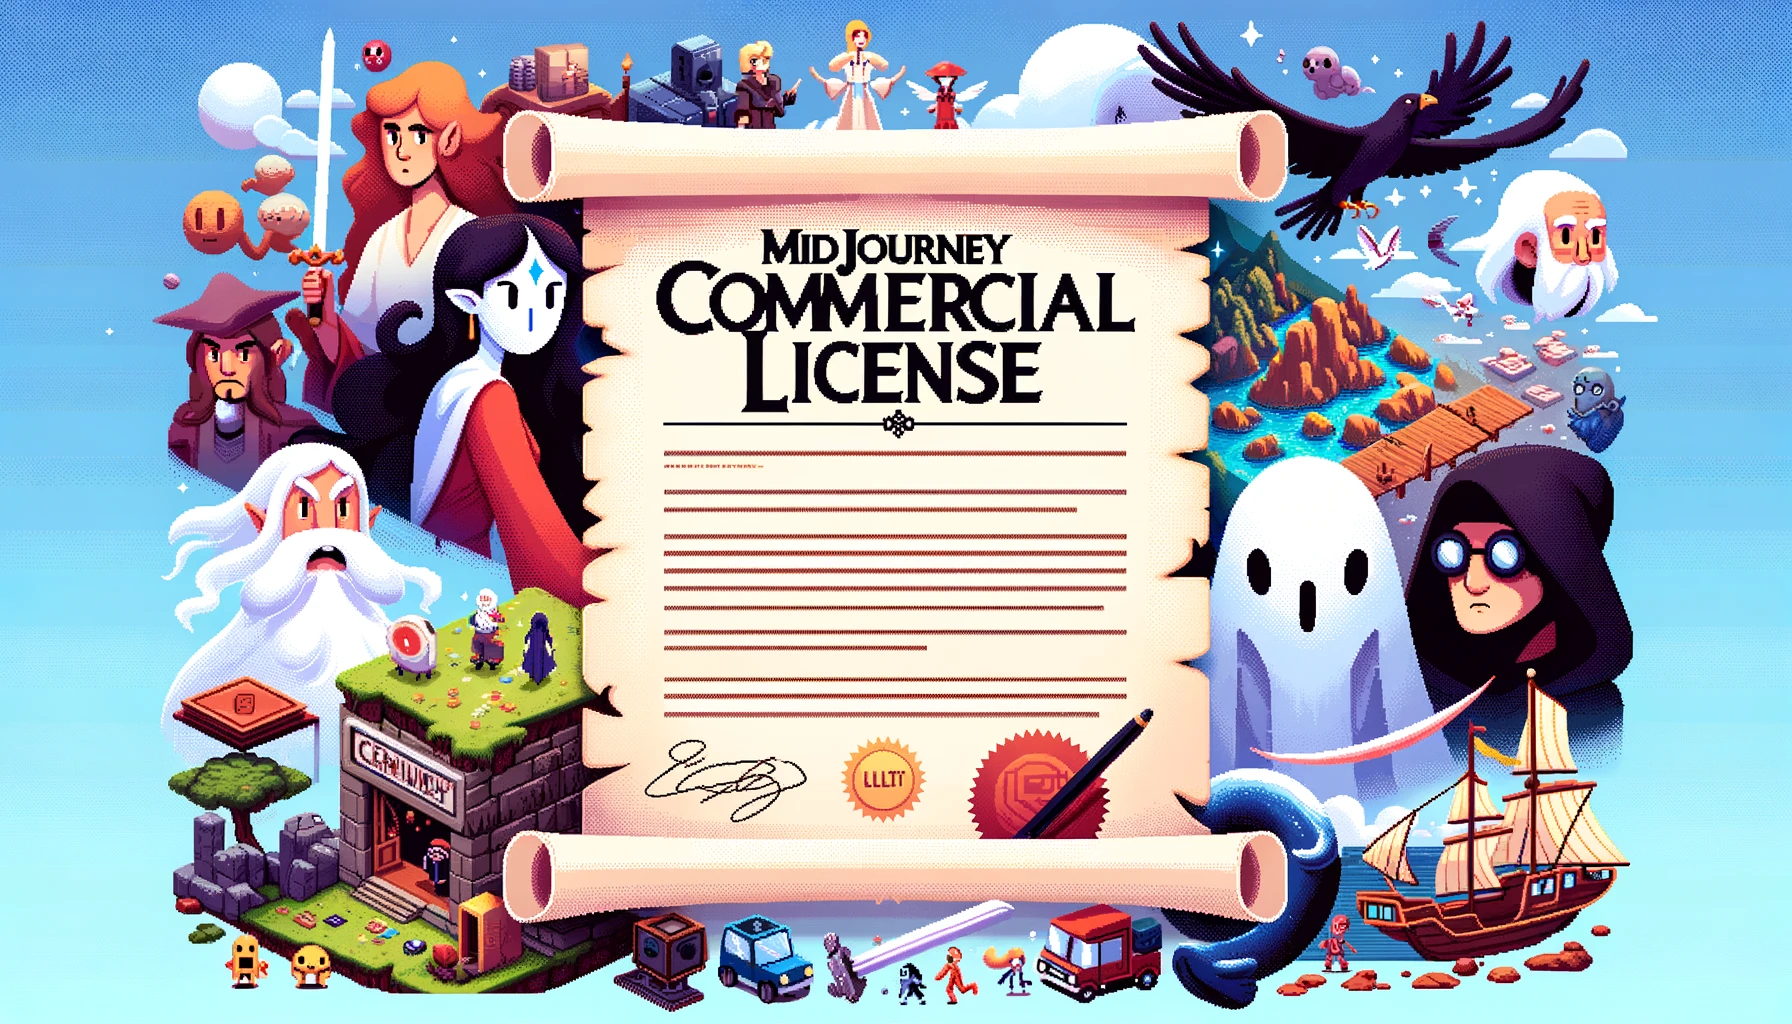 Midjourney Commercial License